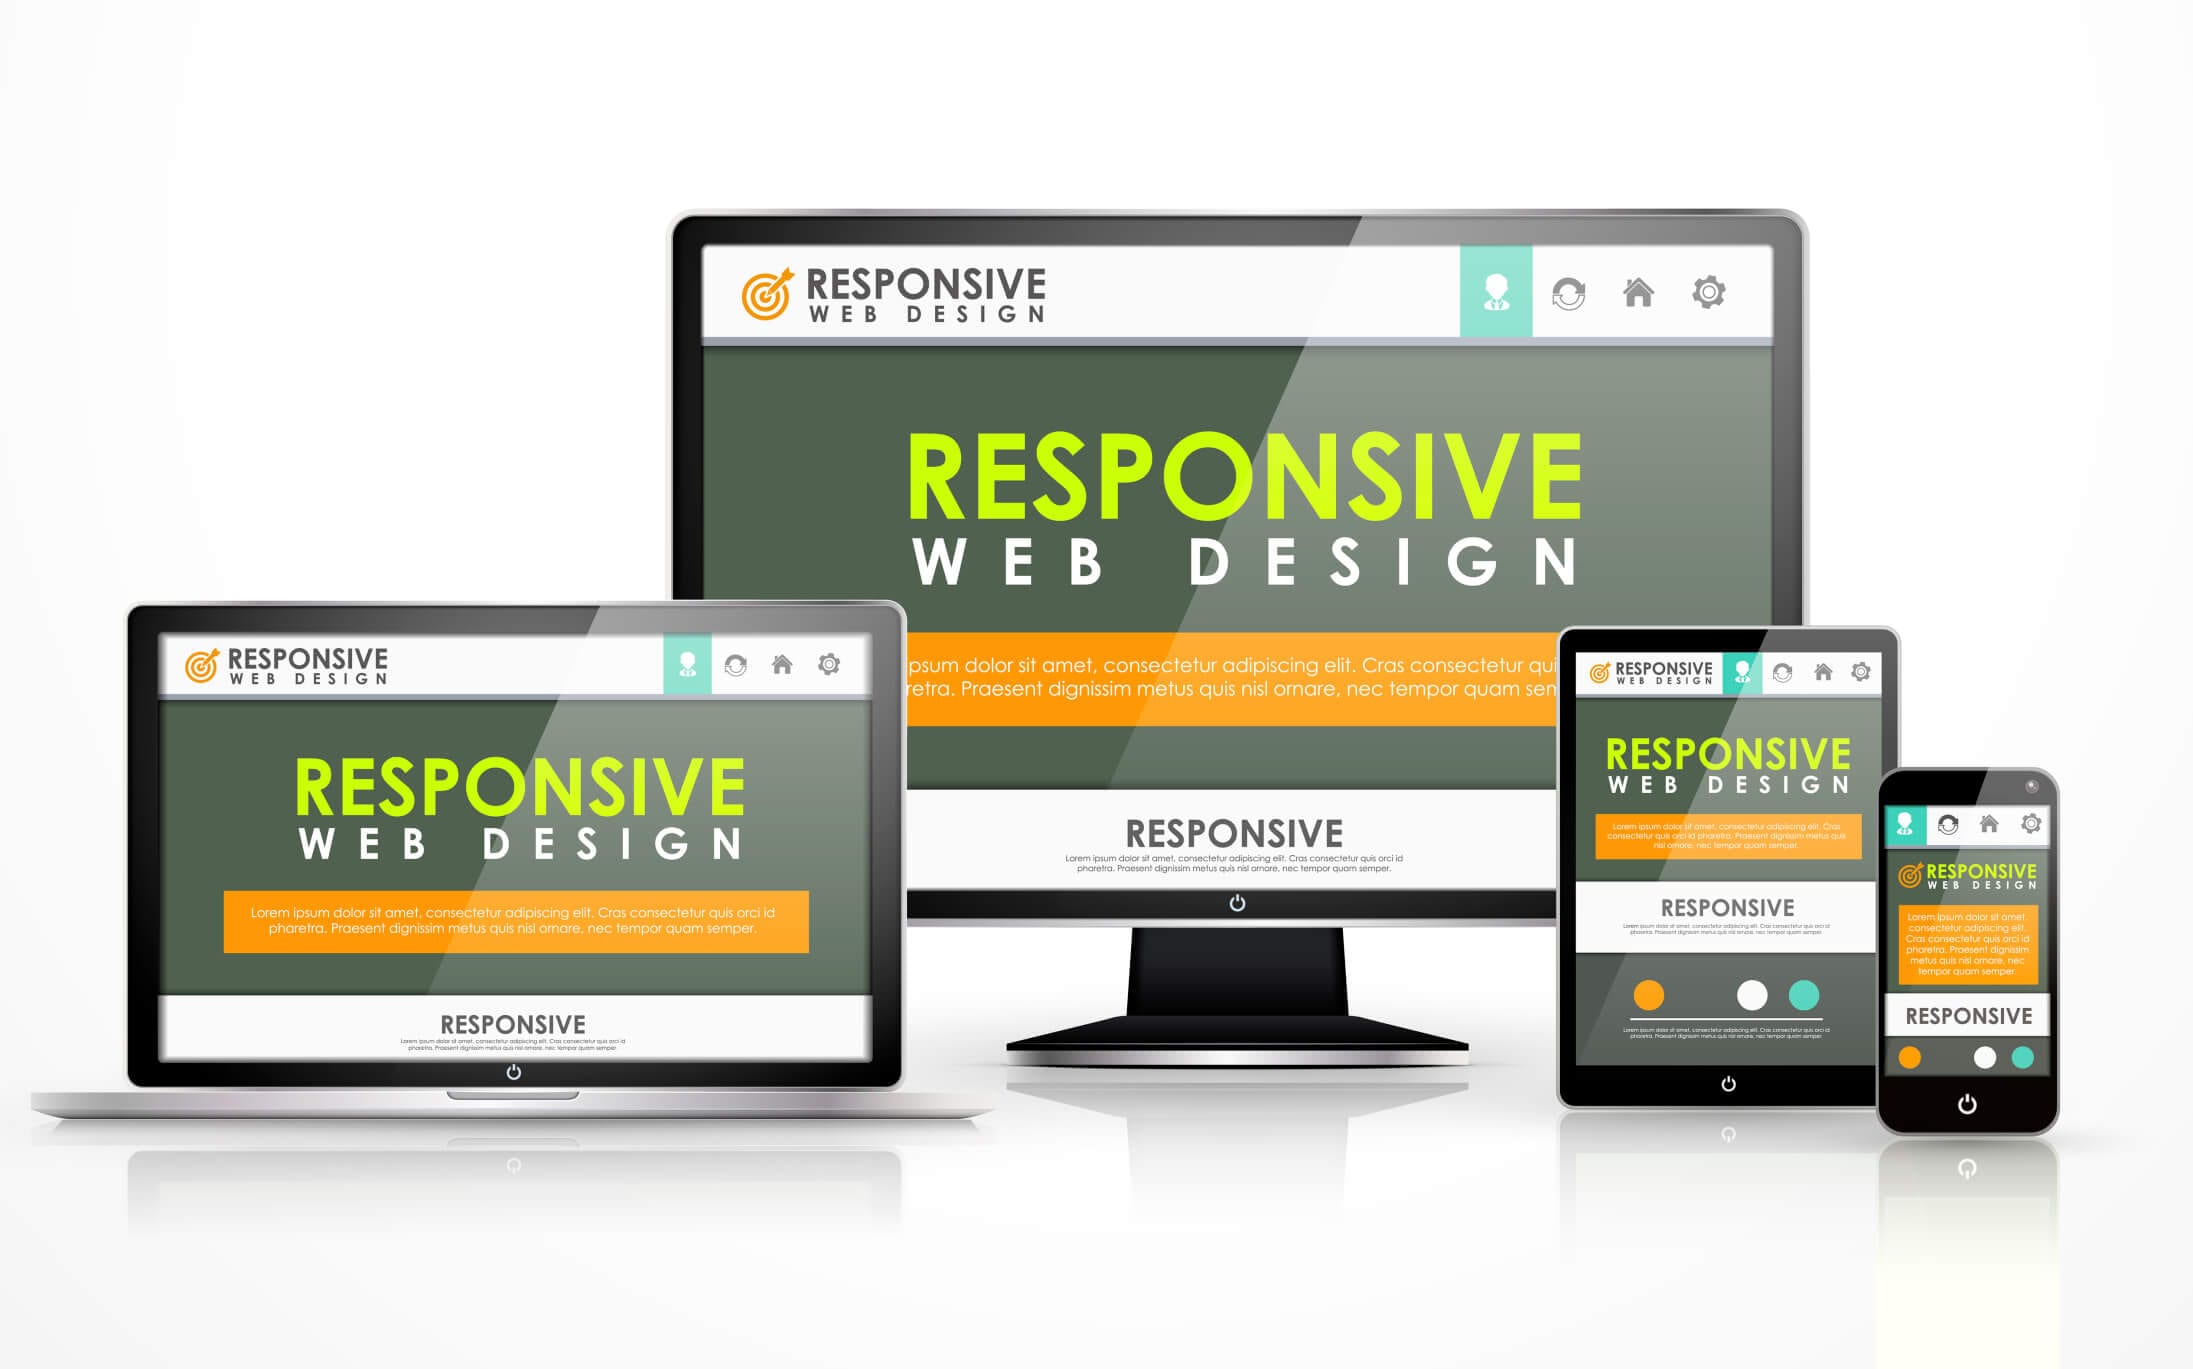 Why Responsive Design is what your Company's Site Needs